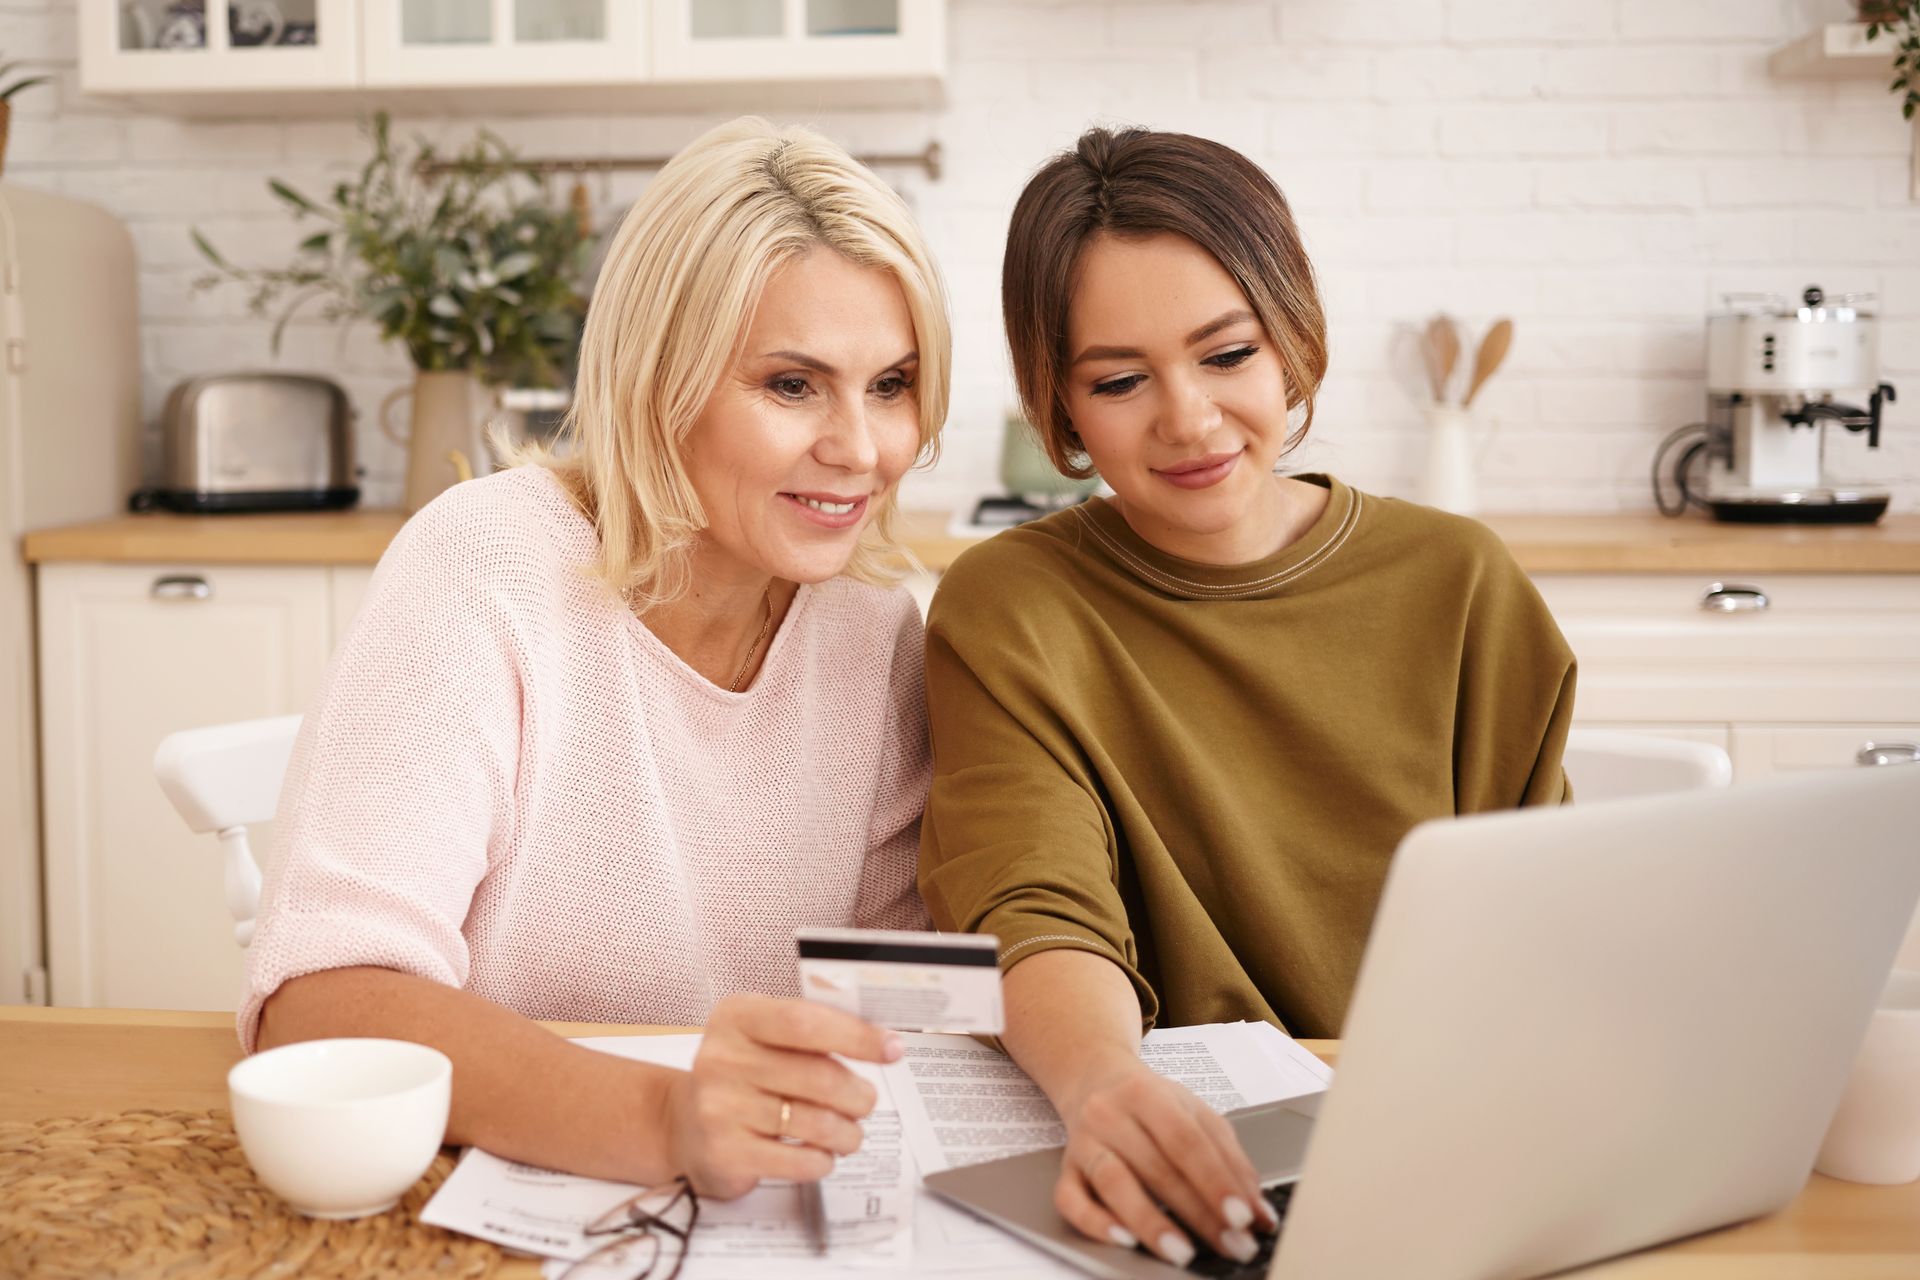 Blonde hair woman and brunette girl looking at computer holding payment card